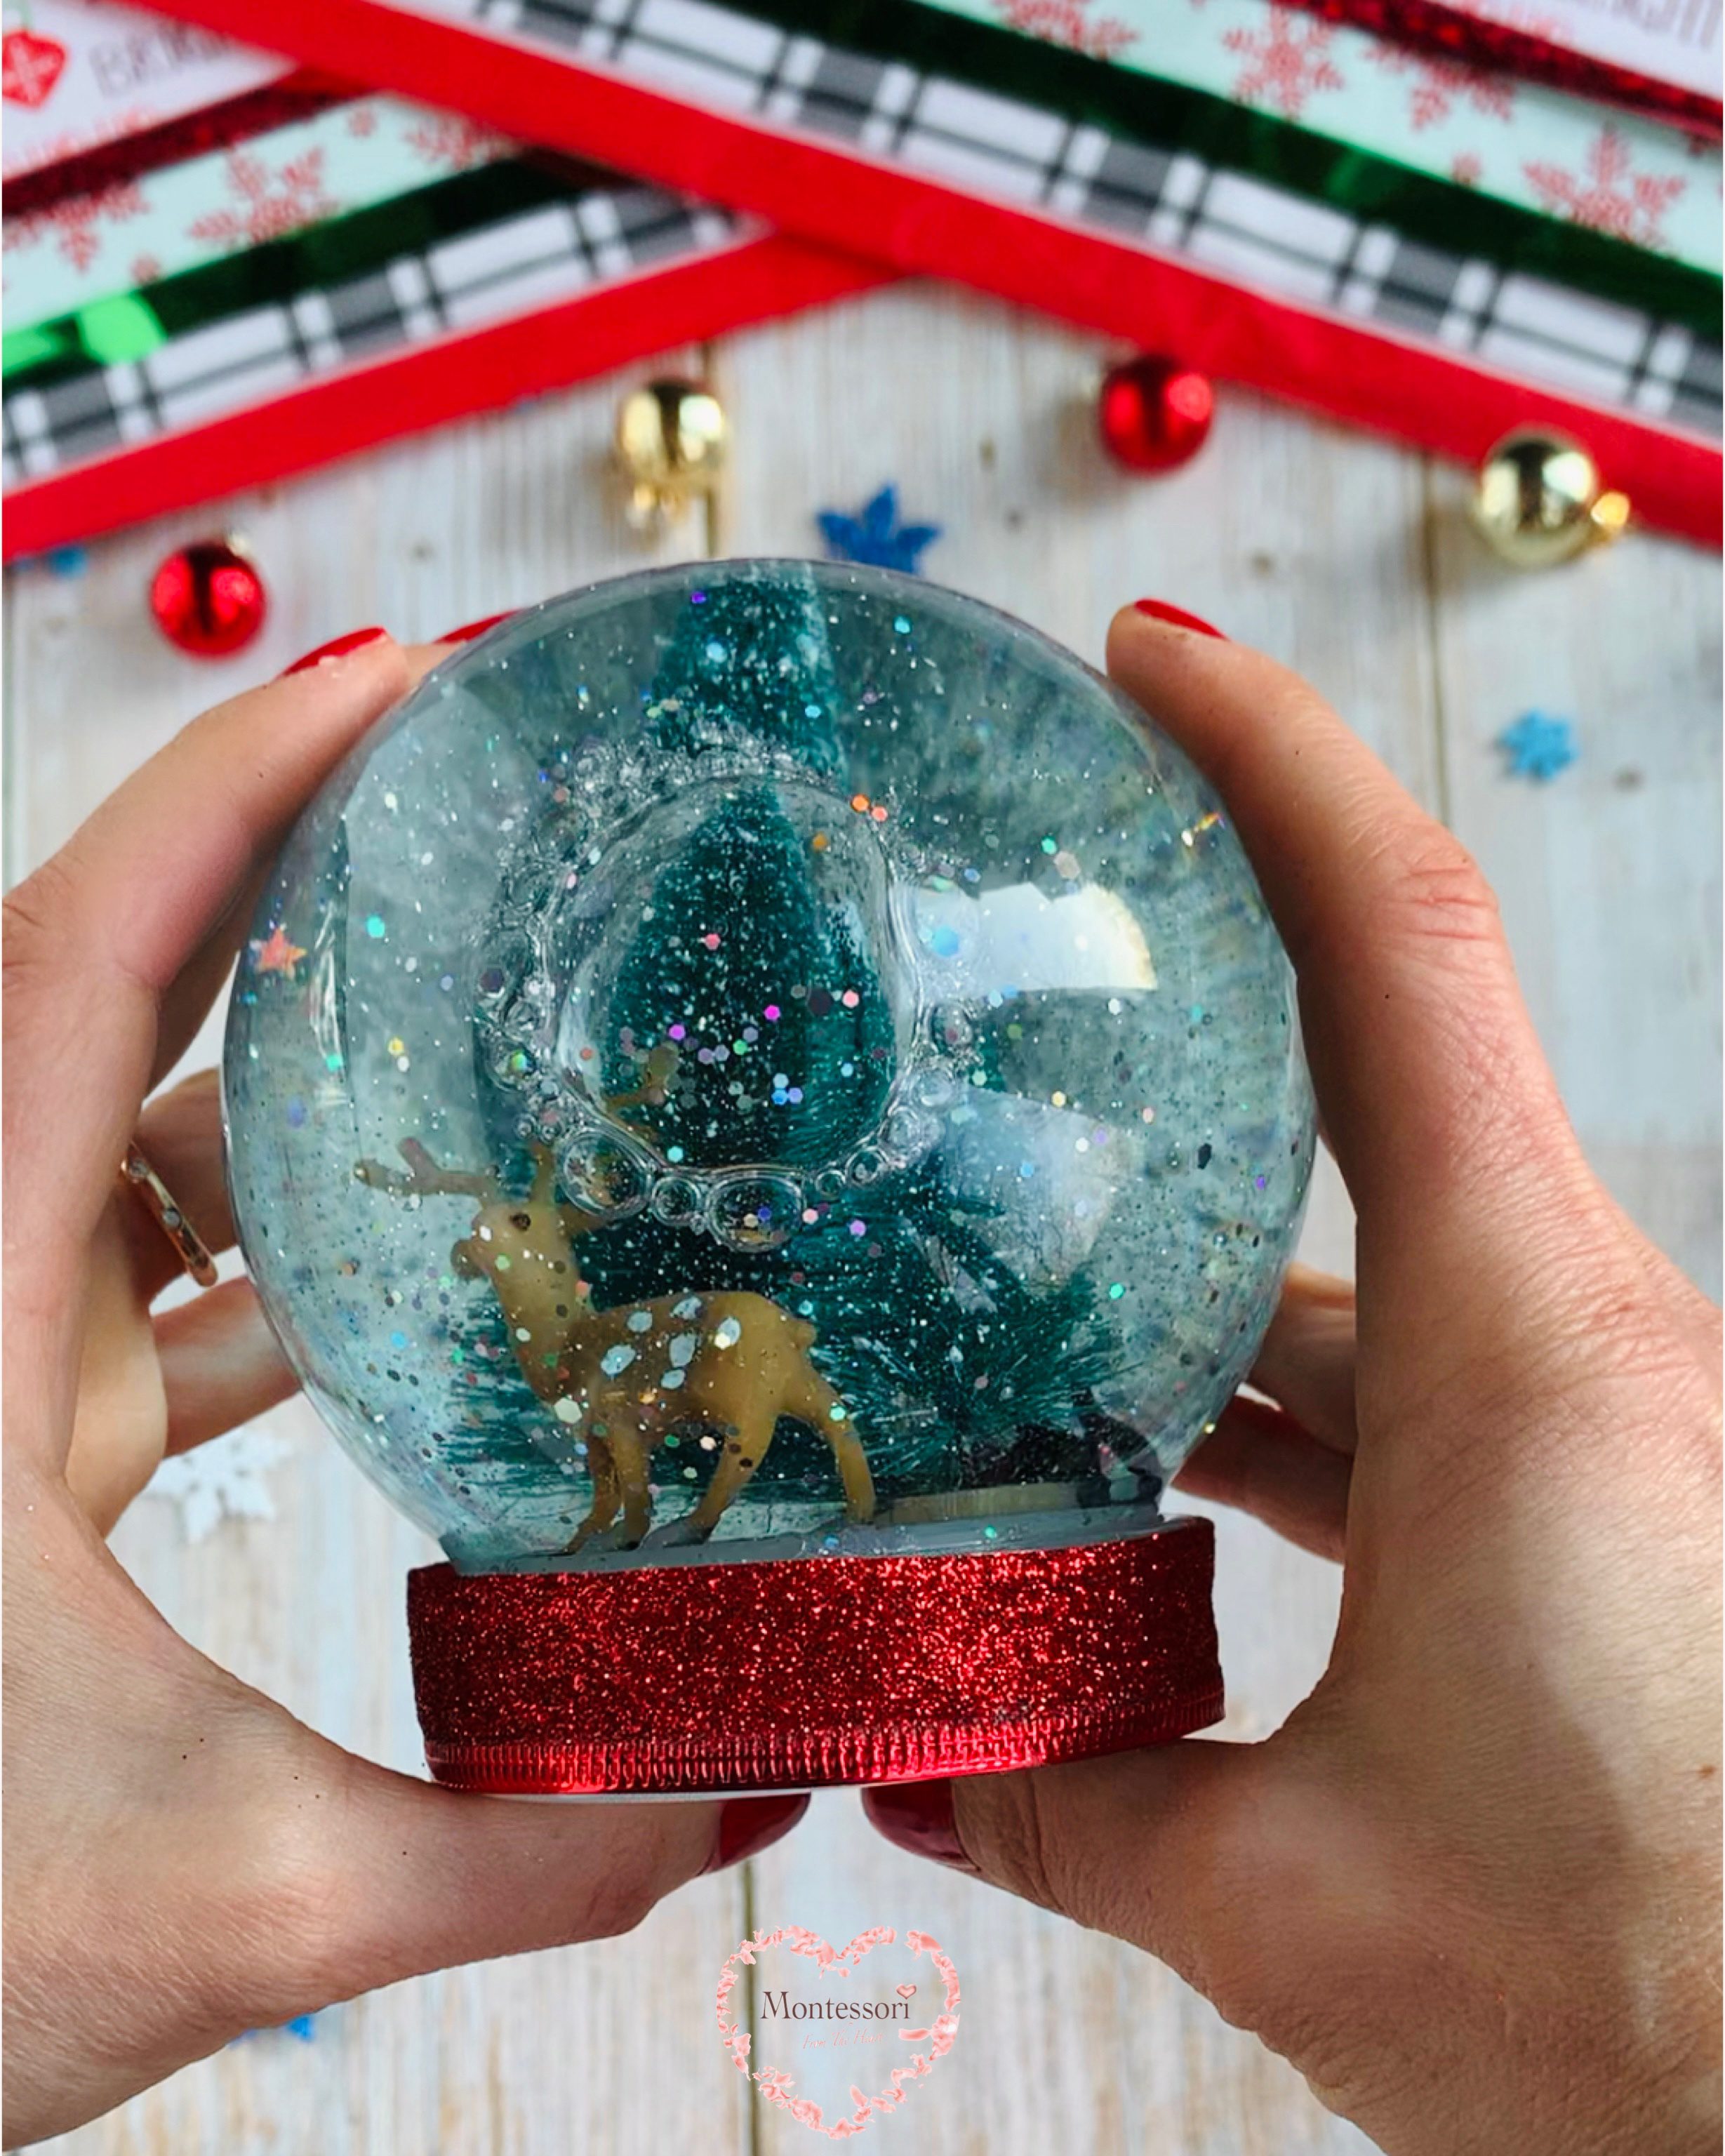 How to Make a Snow Globe - The Best Ideas for Kids